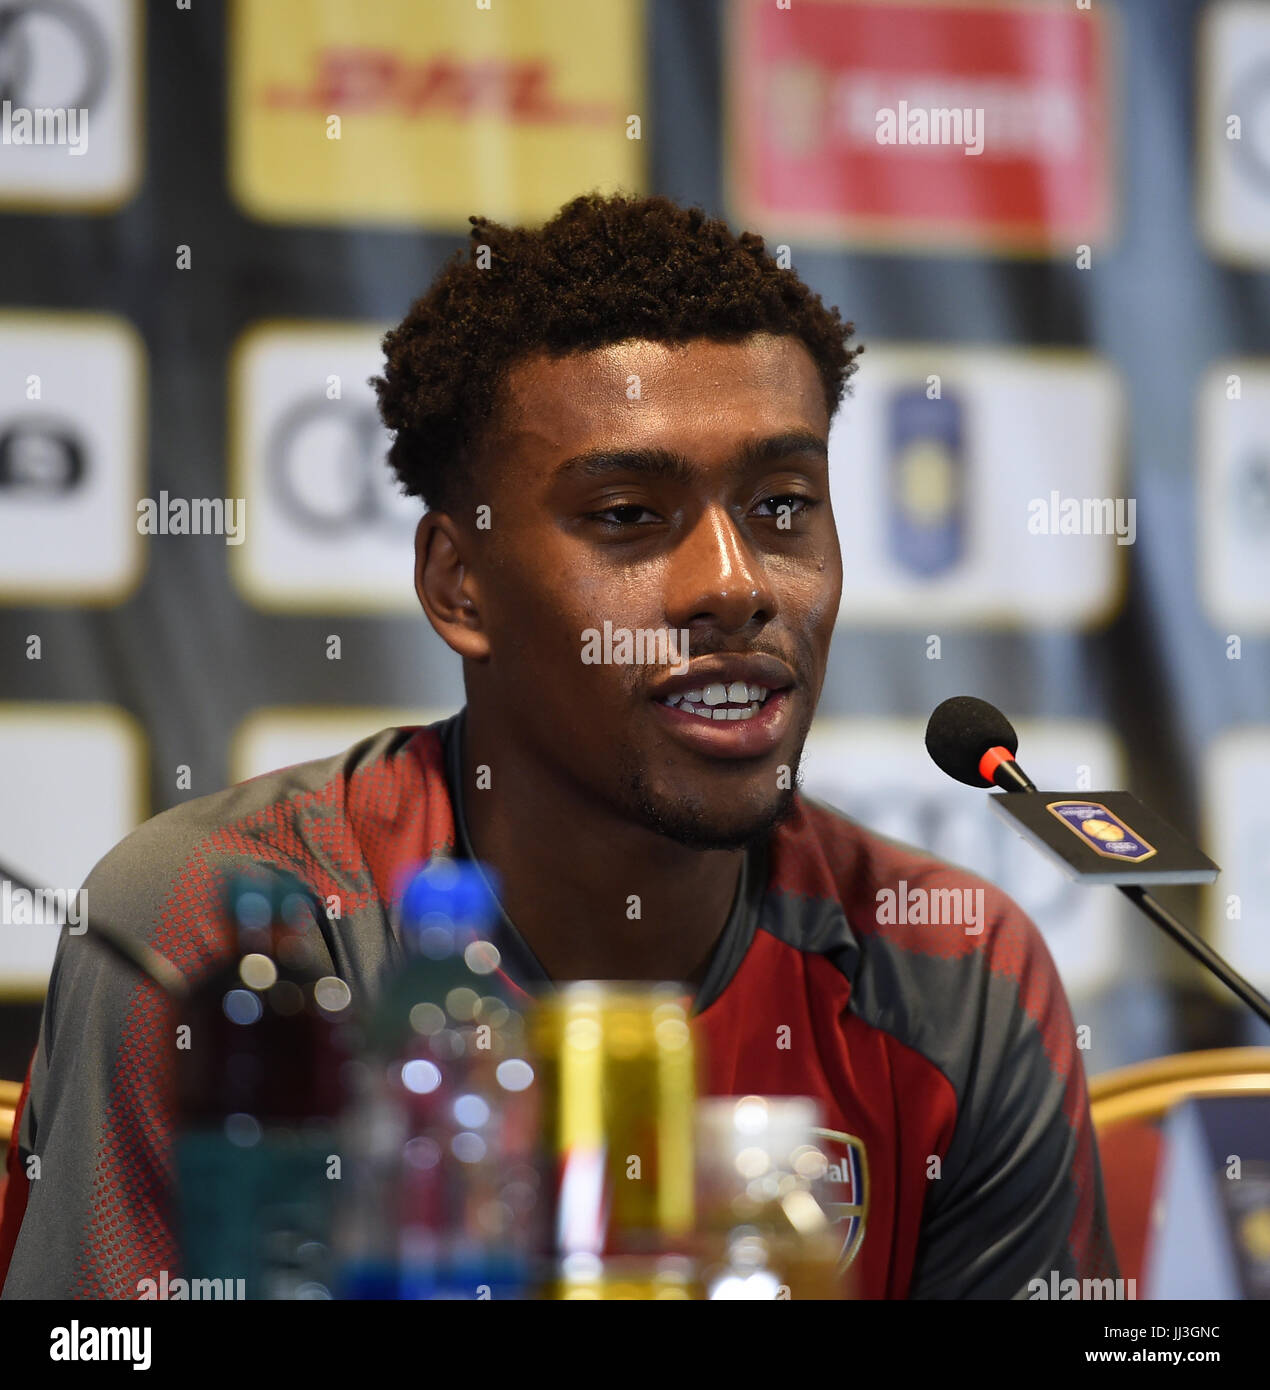 Shanghai, China. 18th July, 2017. Arsenal's player Alex Iwobi attends a press conference prior to the 2017 International Champions Cup China against Bayern Munich in Shanghai, China, July 18, 2017. Credit: Jia Yuchen/Xinhua/Alamy Live News Stock Photo